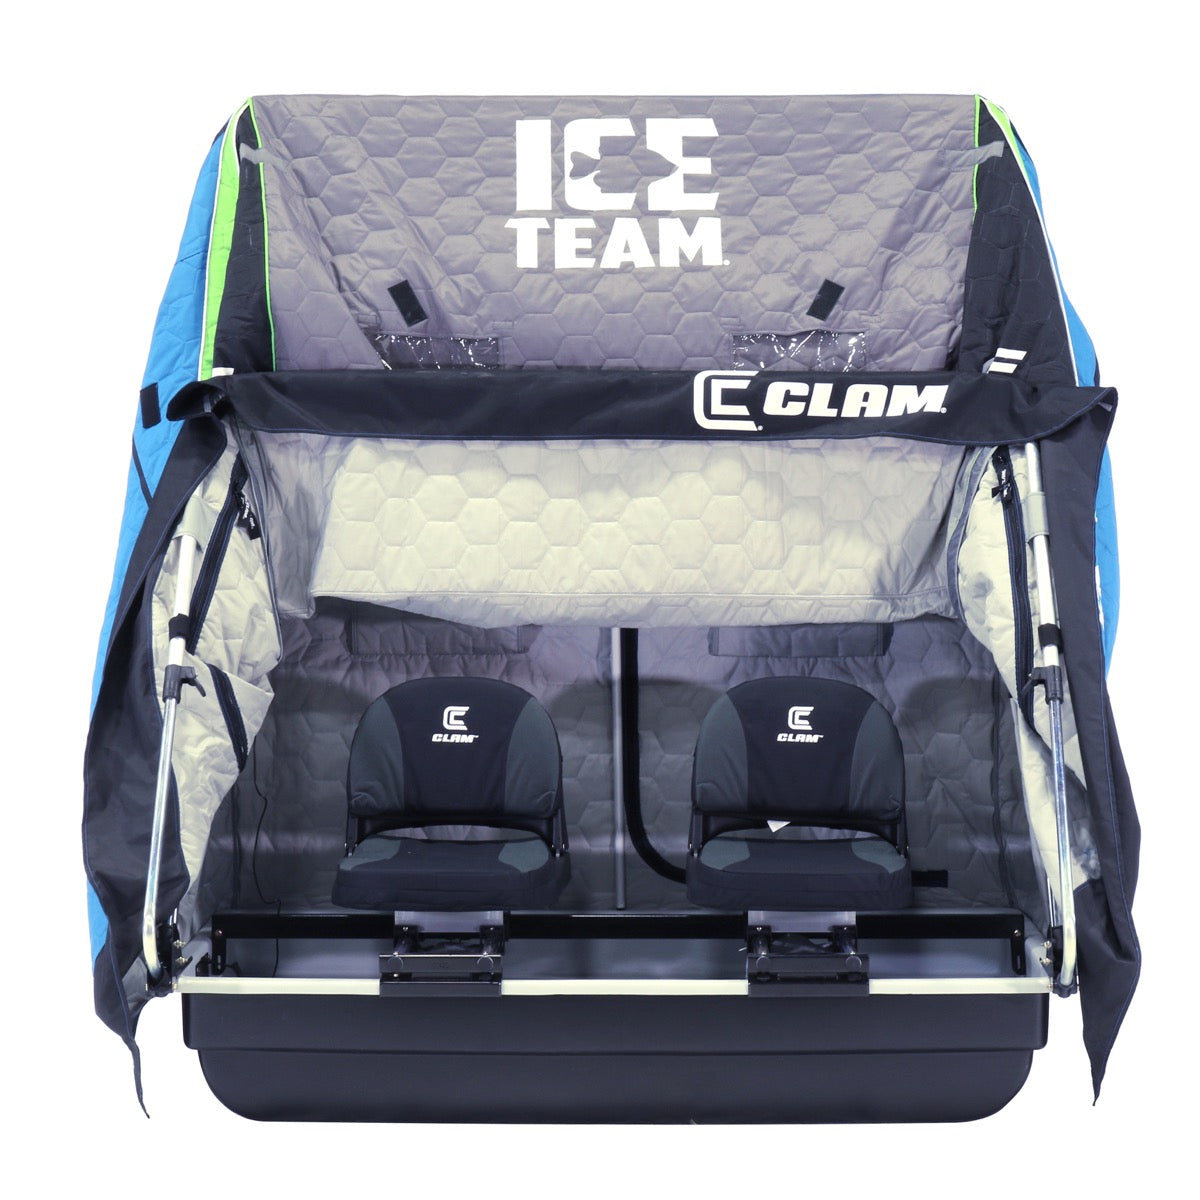 CLAM Voyager XT Thermal ICE TEAM Shelter – Dewey Catchem & How